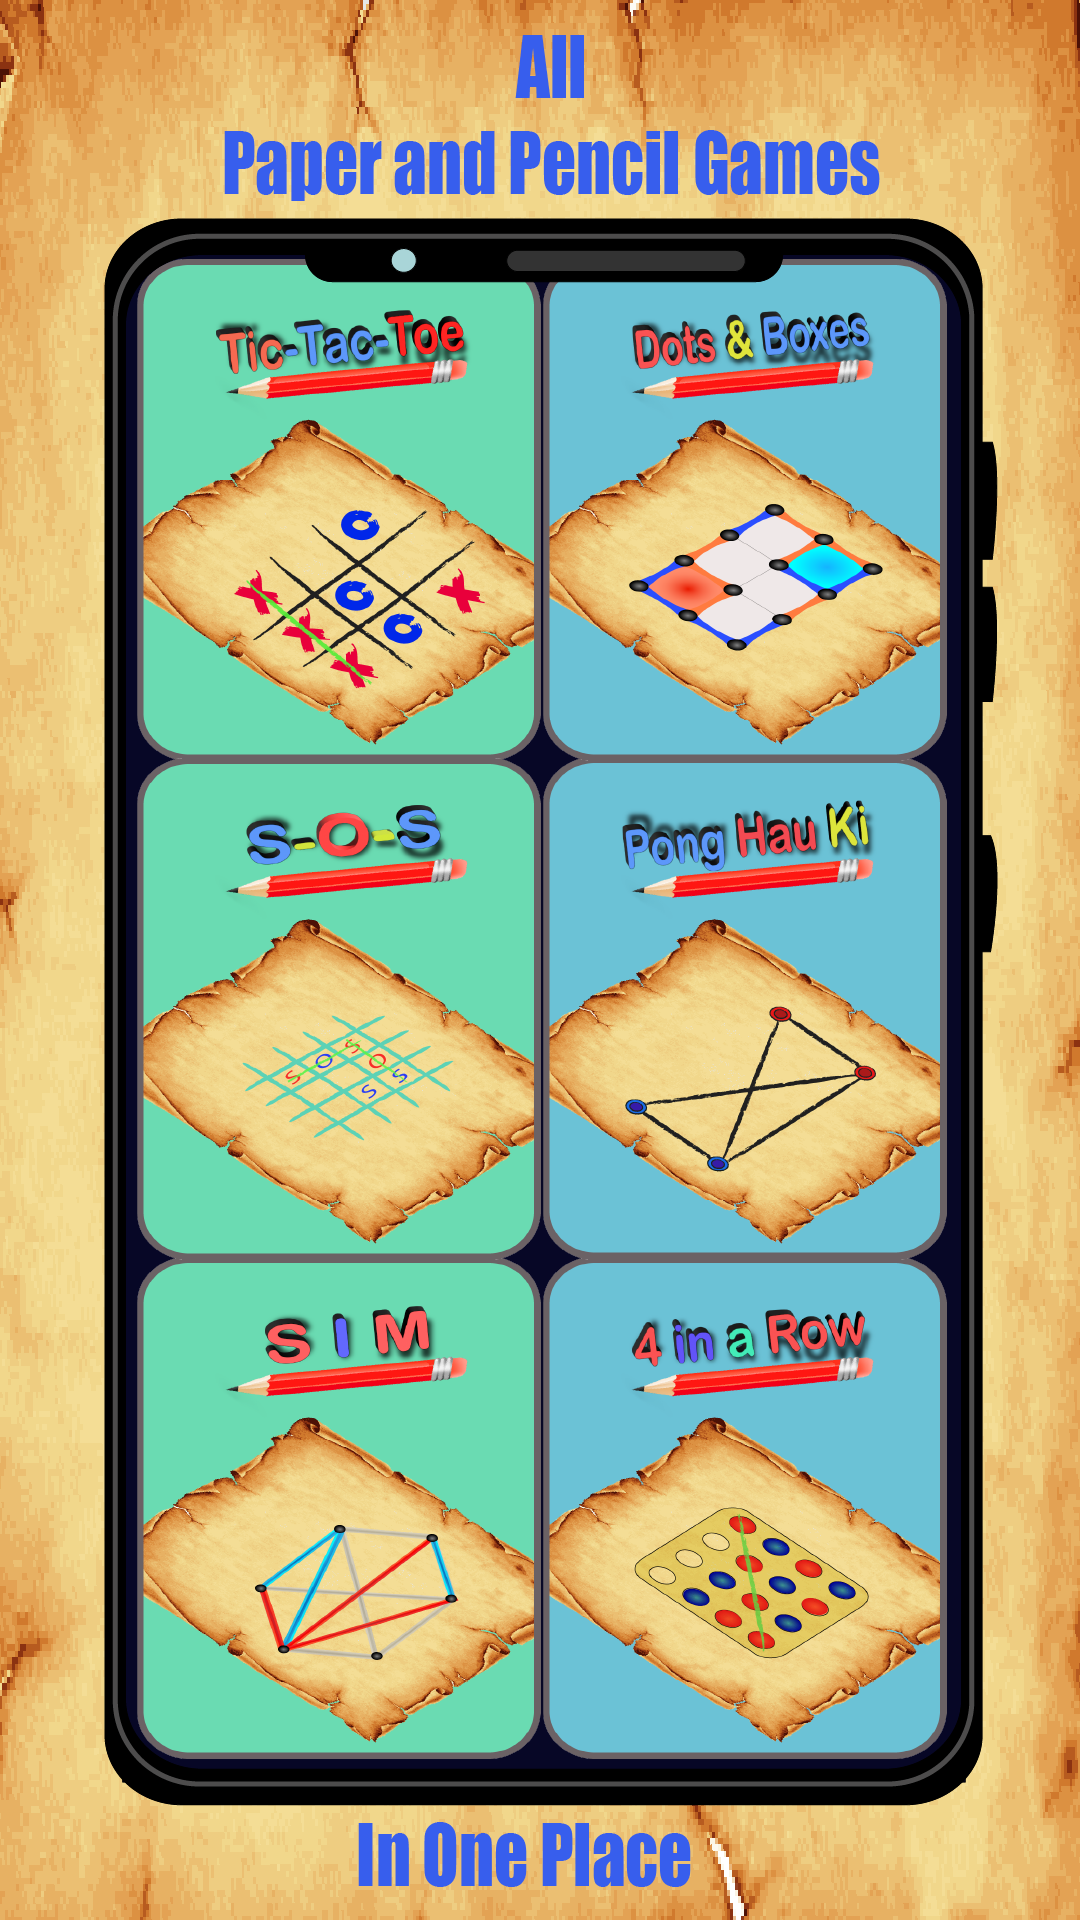 Paper Games Game for Android - Download